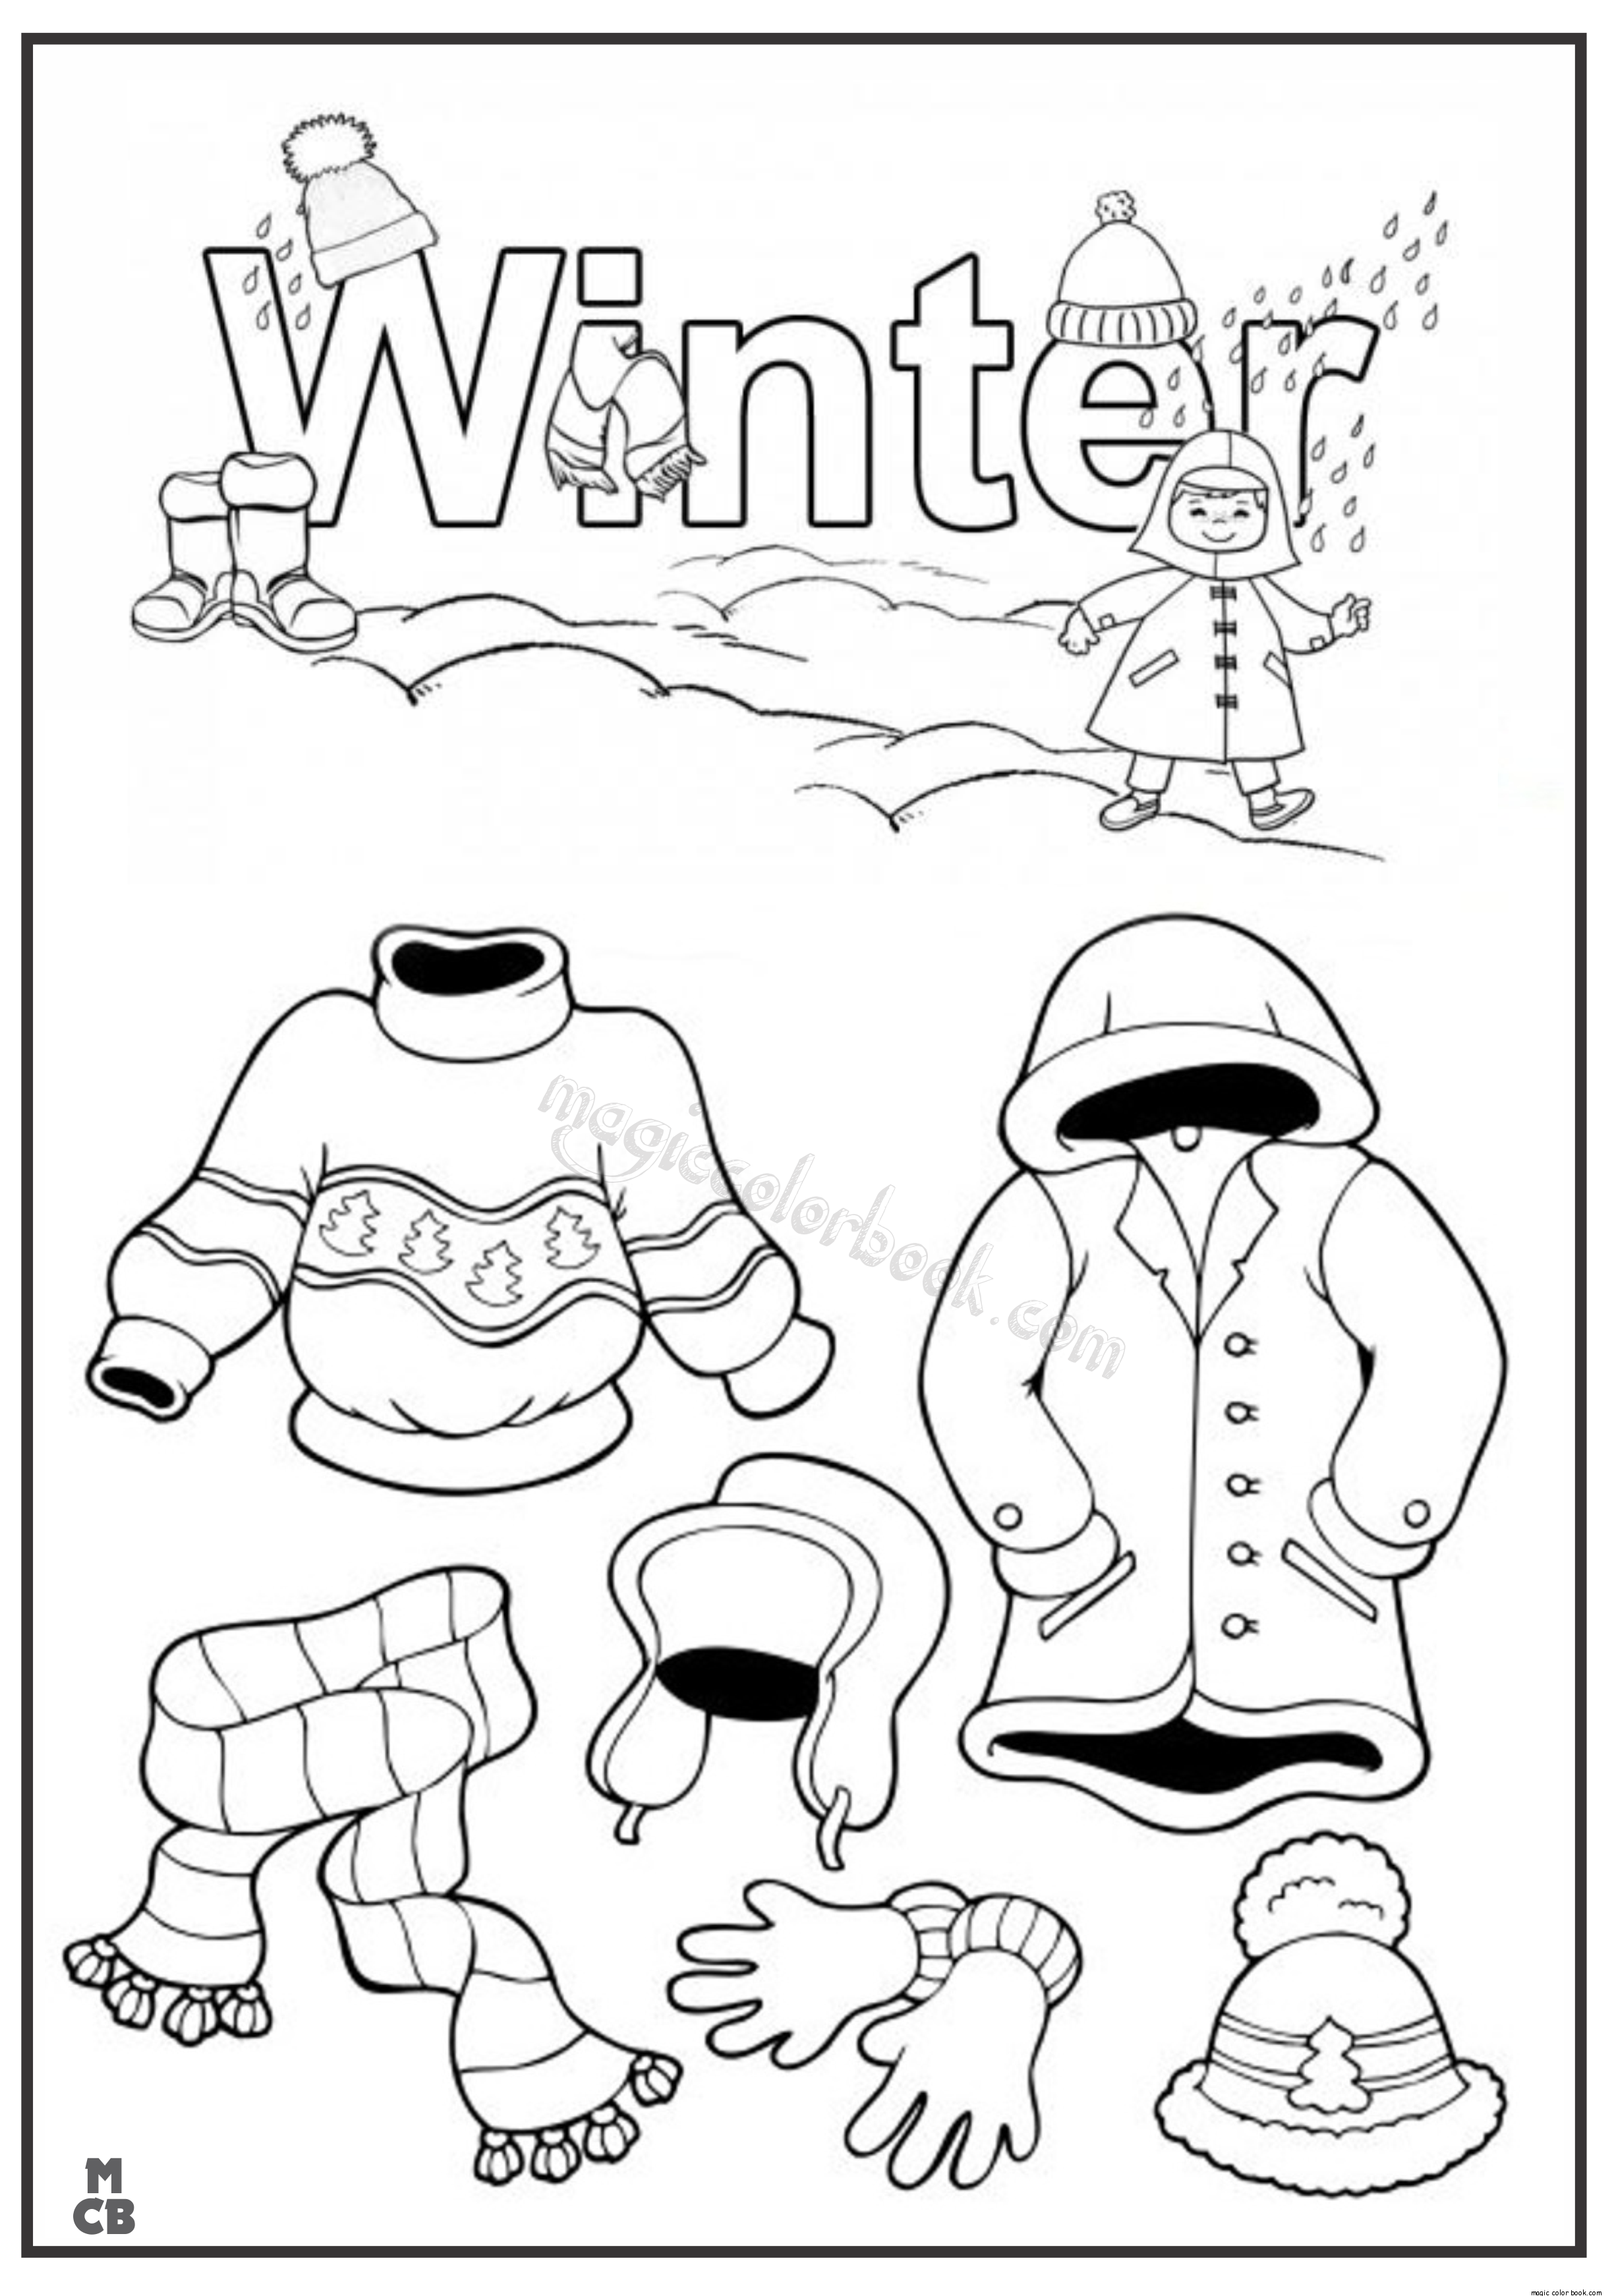  Winter  season 164723 Nature  Printable coloring  pages 